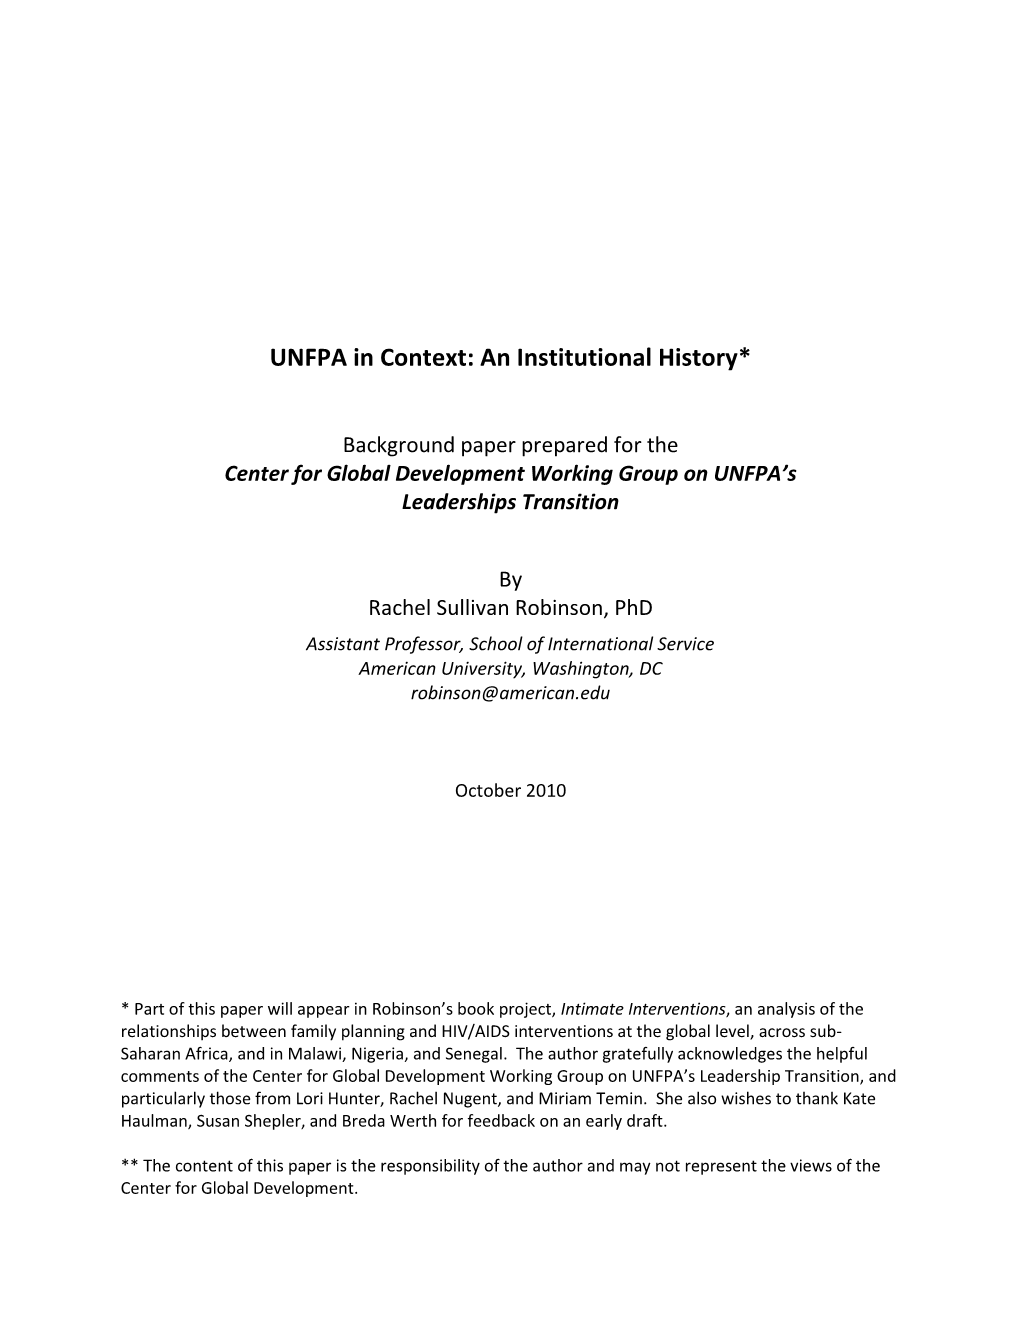 UNFPA in Context: an Institutional History*